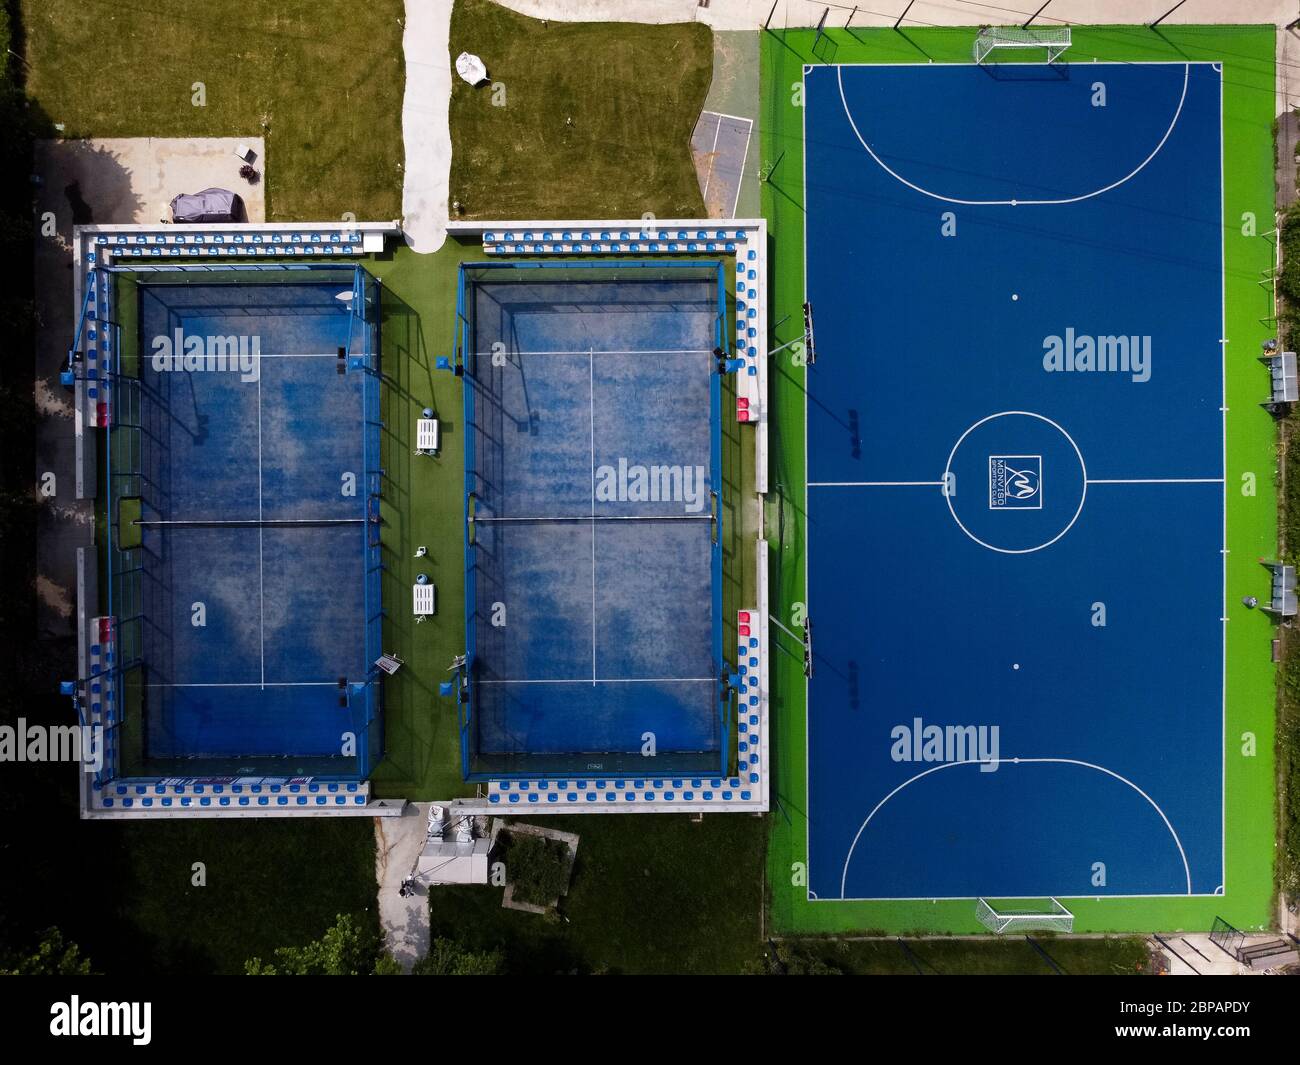 Grugliasco, Italy - 18 May, 2020: (EDITORS NOTE: Image was created with a drone.) Aerial view shows an empty futsal (five-a-side football) pitch and two padel courts. The lockdown due to the COVID-19 coronavirus emergency banned all sports activities. Credit: Nicolò Campo/Alamy Live News Stock Photo